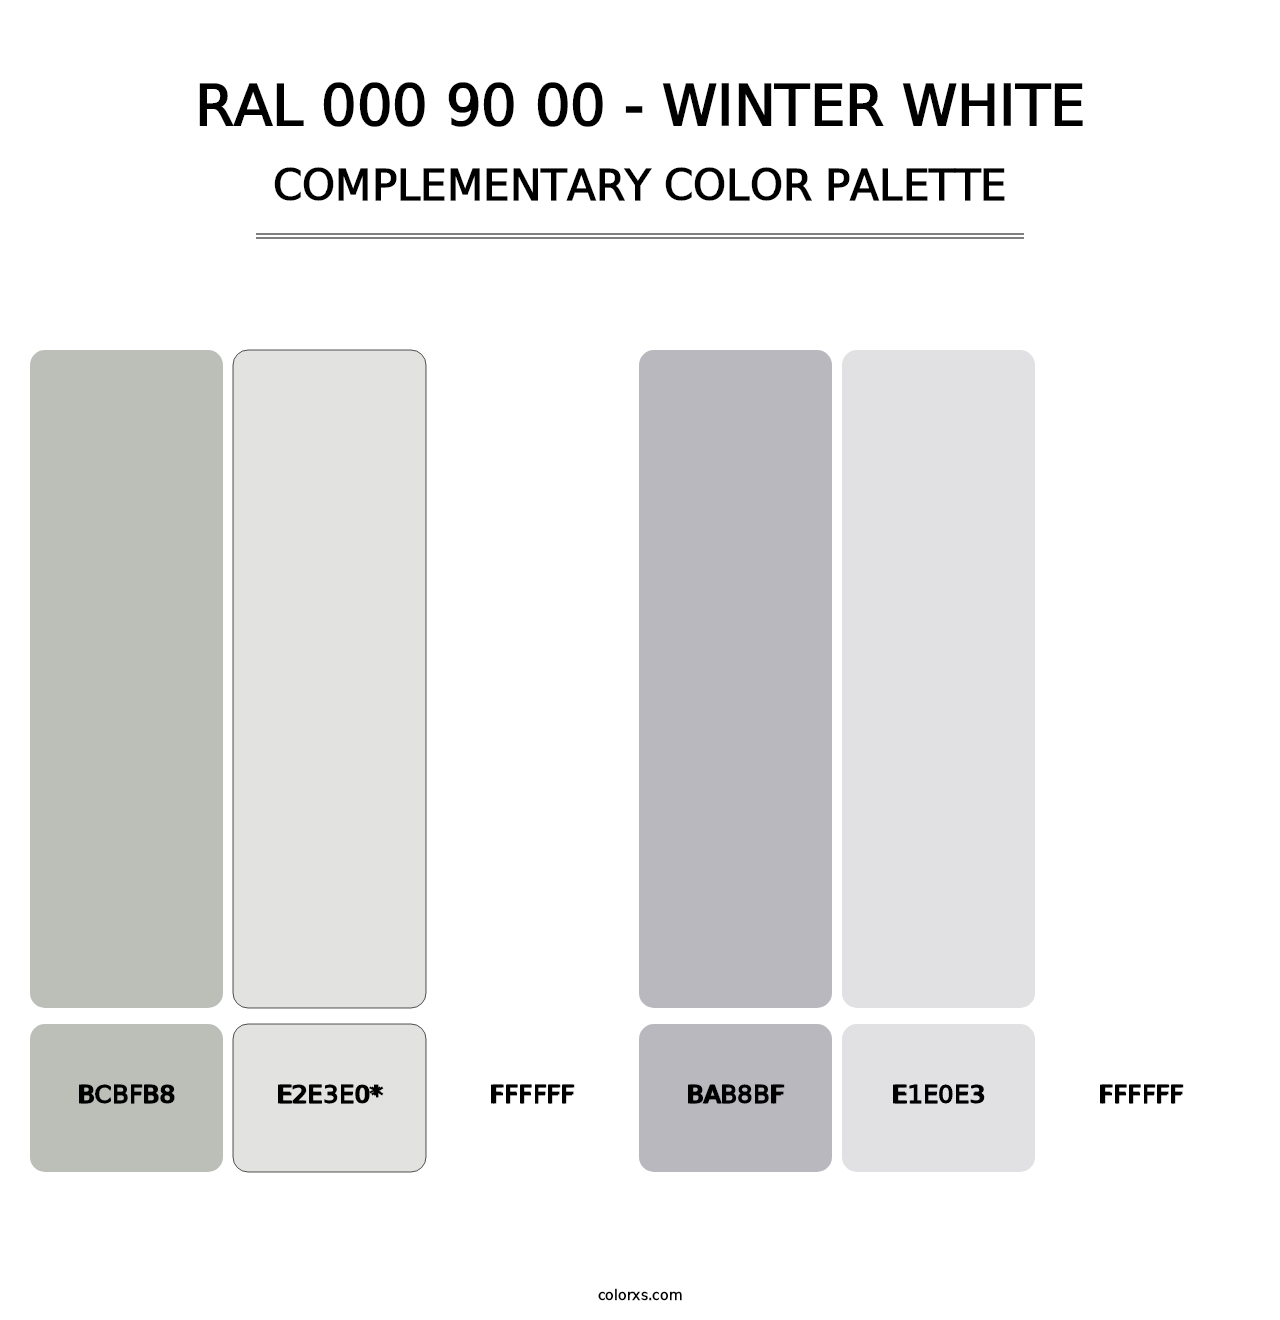 RAL 000 90 00 - Winter White - Complementary Color Palette